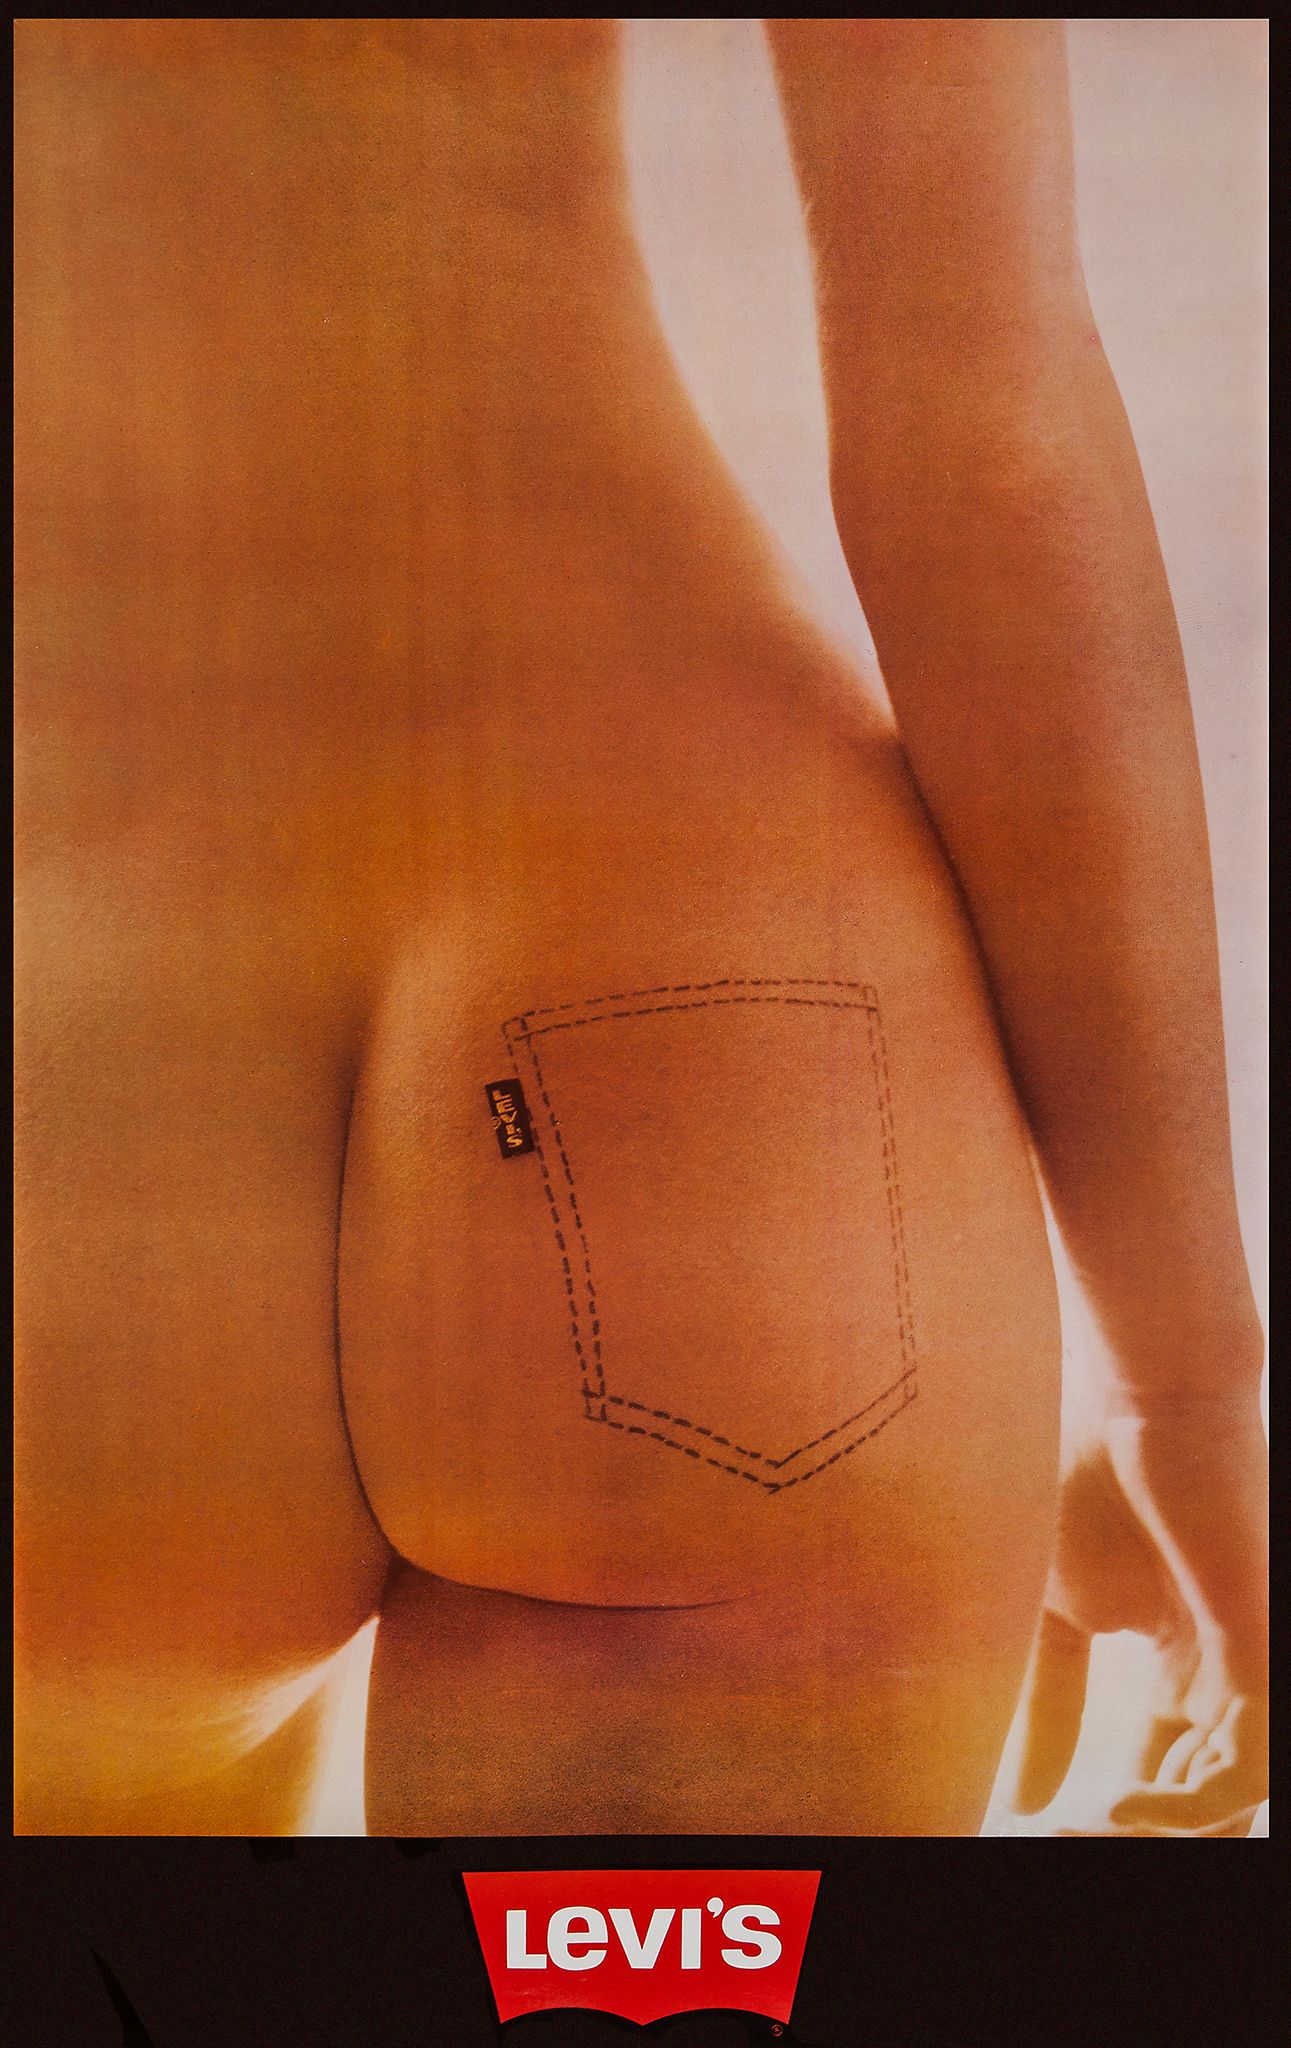 BLADEL, Ida van (1931-) - LEVI'S photographic offset poster in colours, 1971, printed by Vita